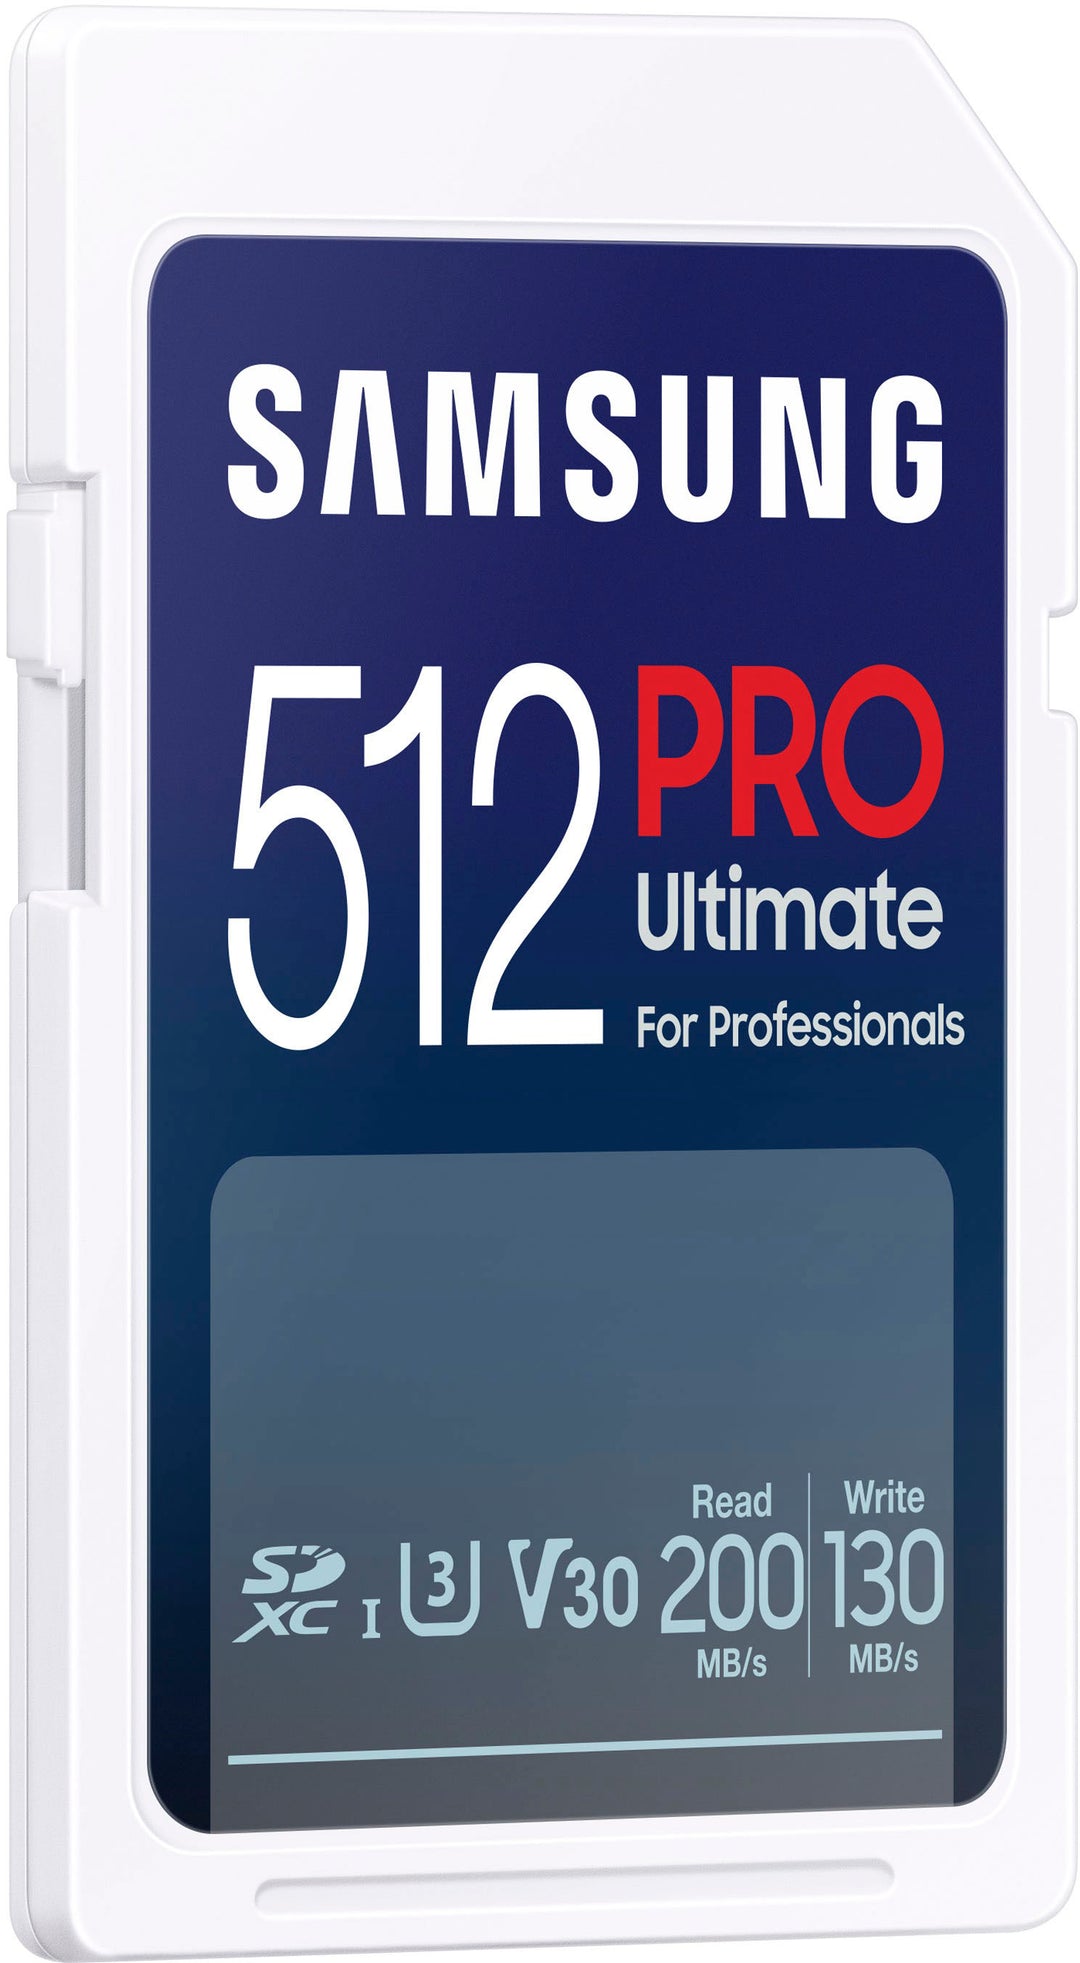 Samsung - PRO Ultimate Full Size 512GB SDXC Memory Card, Up to 200 MB/s, UHS I, C10, U3, V30, A2 (MB_4